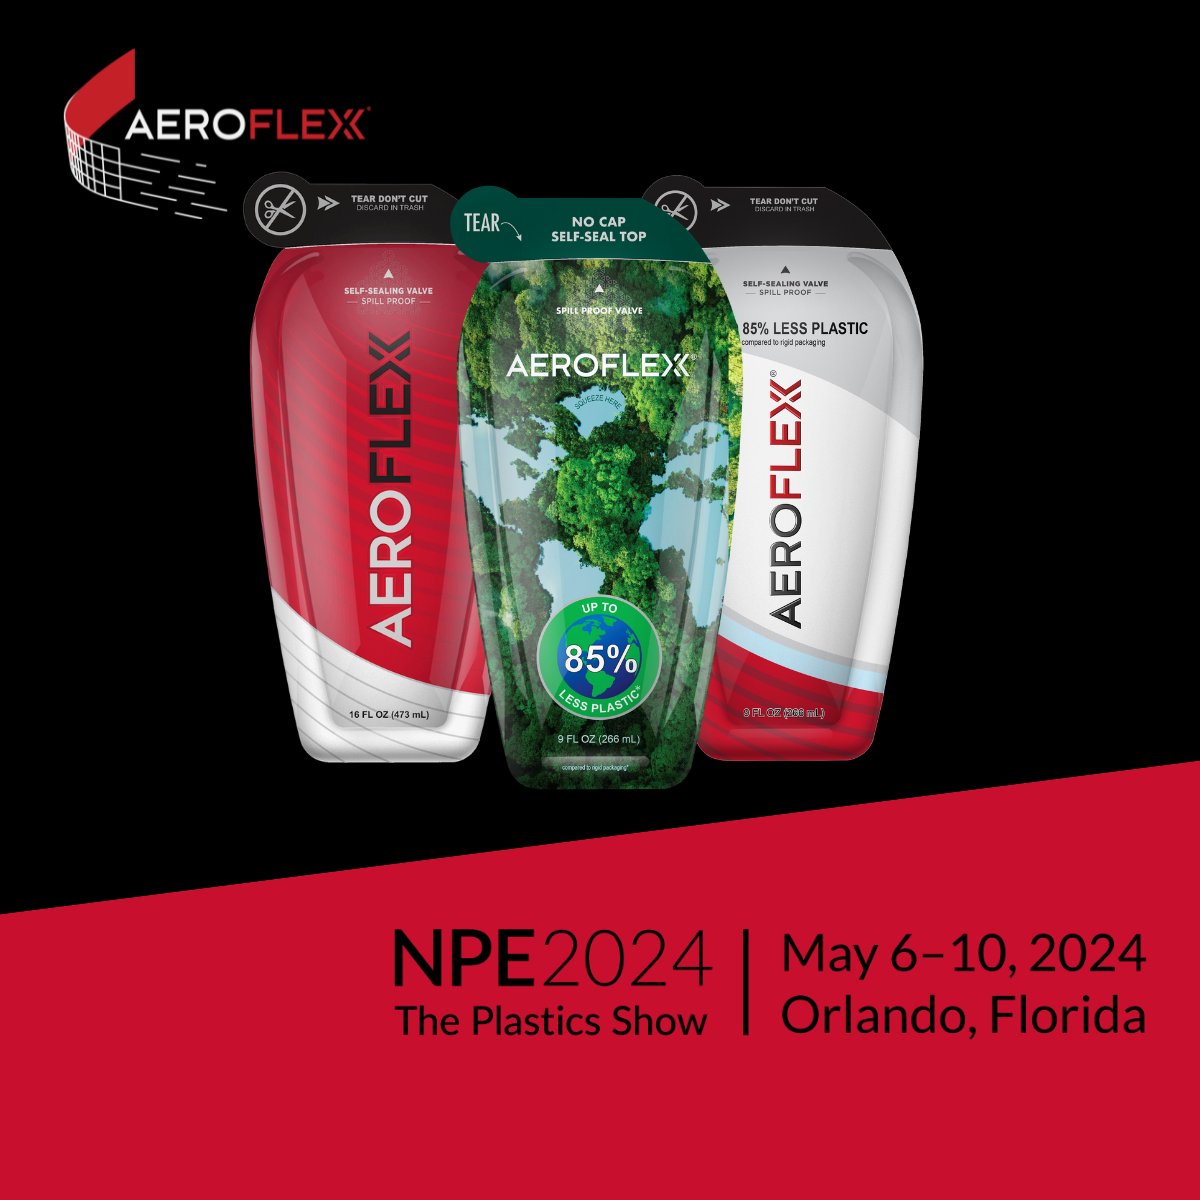 Excited to attend #npe2024 next week! Are you also going? Schedule a meeting with our team hubs.la/Q02vxBBC0
#letstalkplastic #sustainablepackaging #liquidpackaging